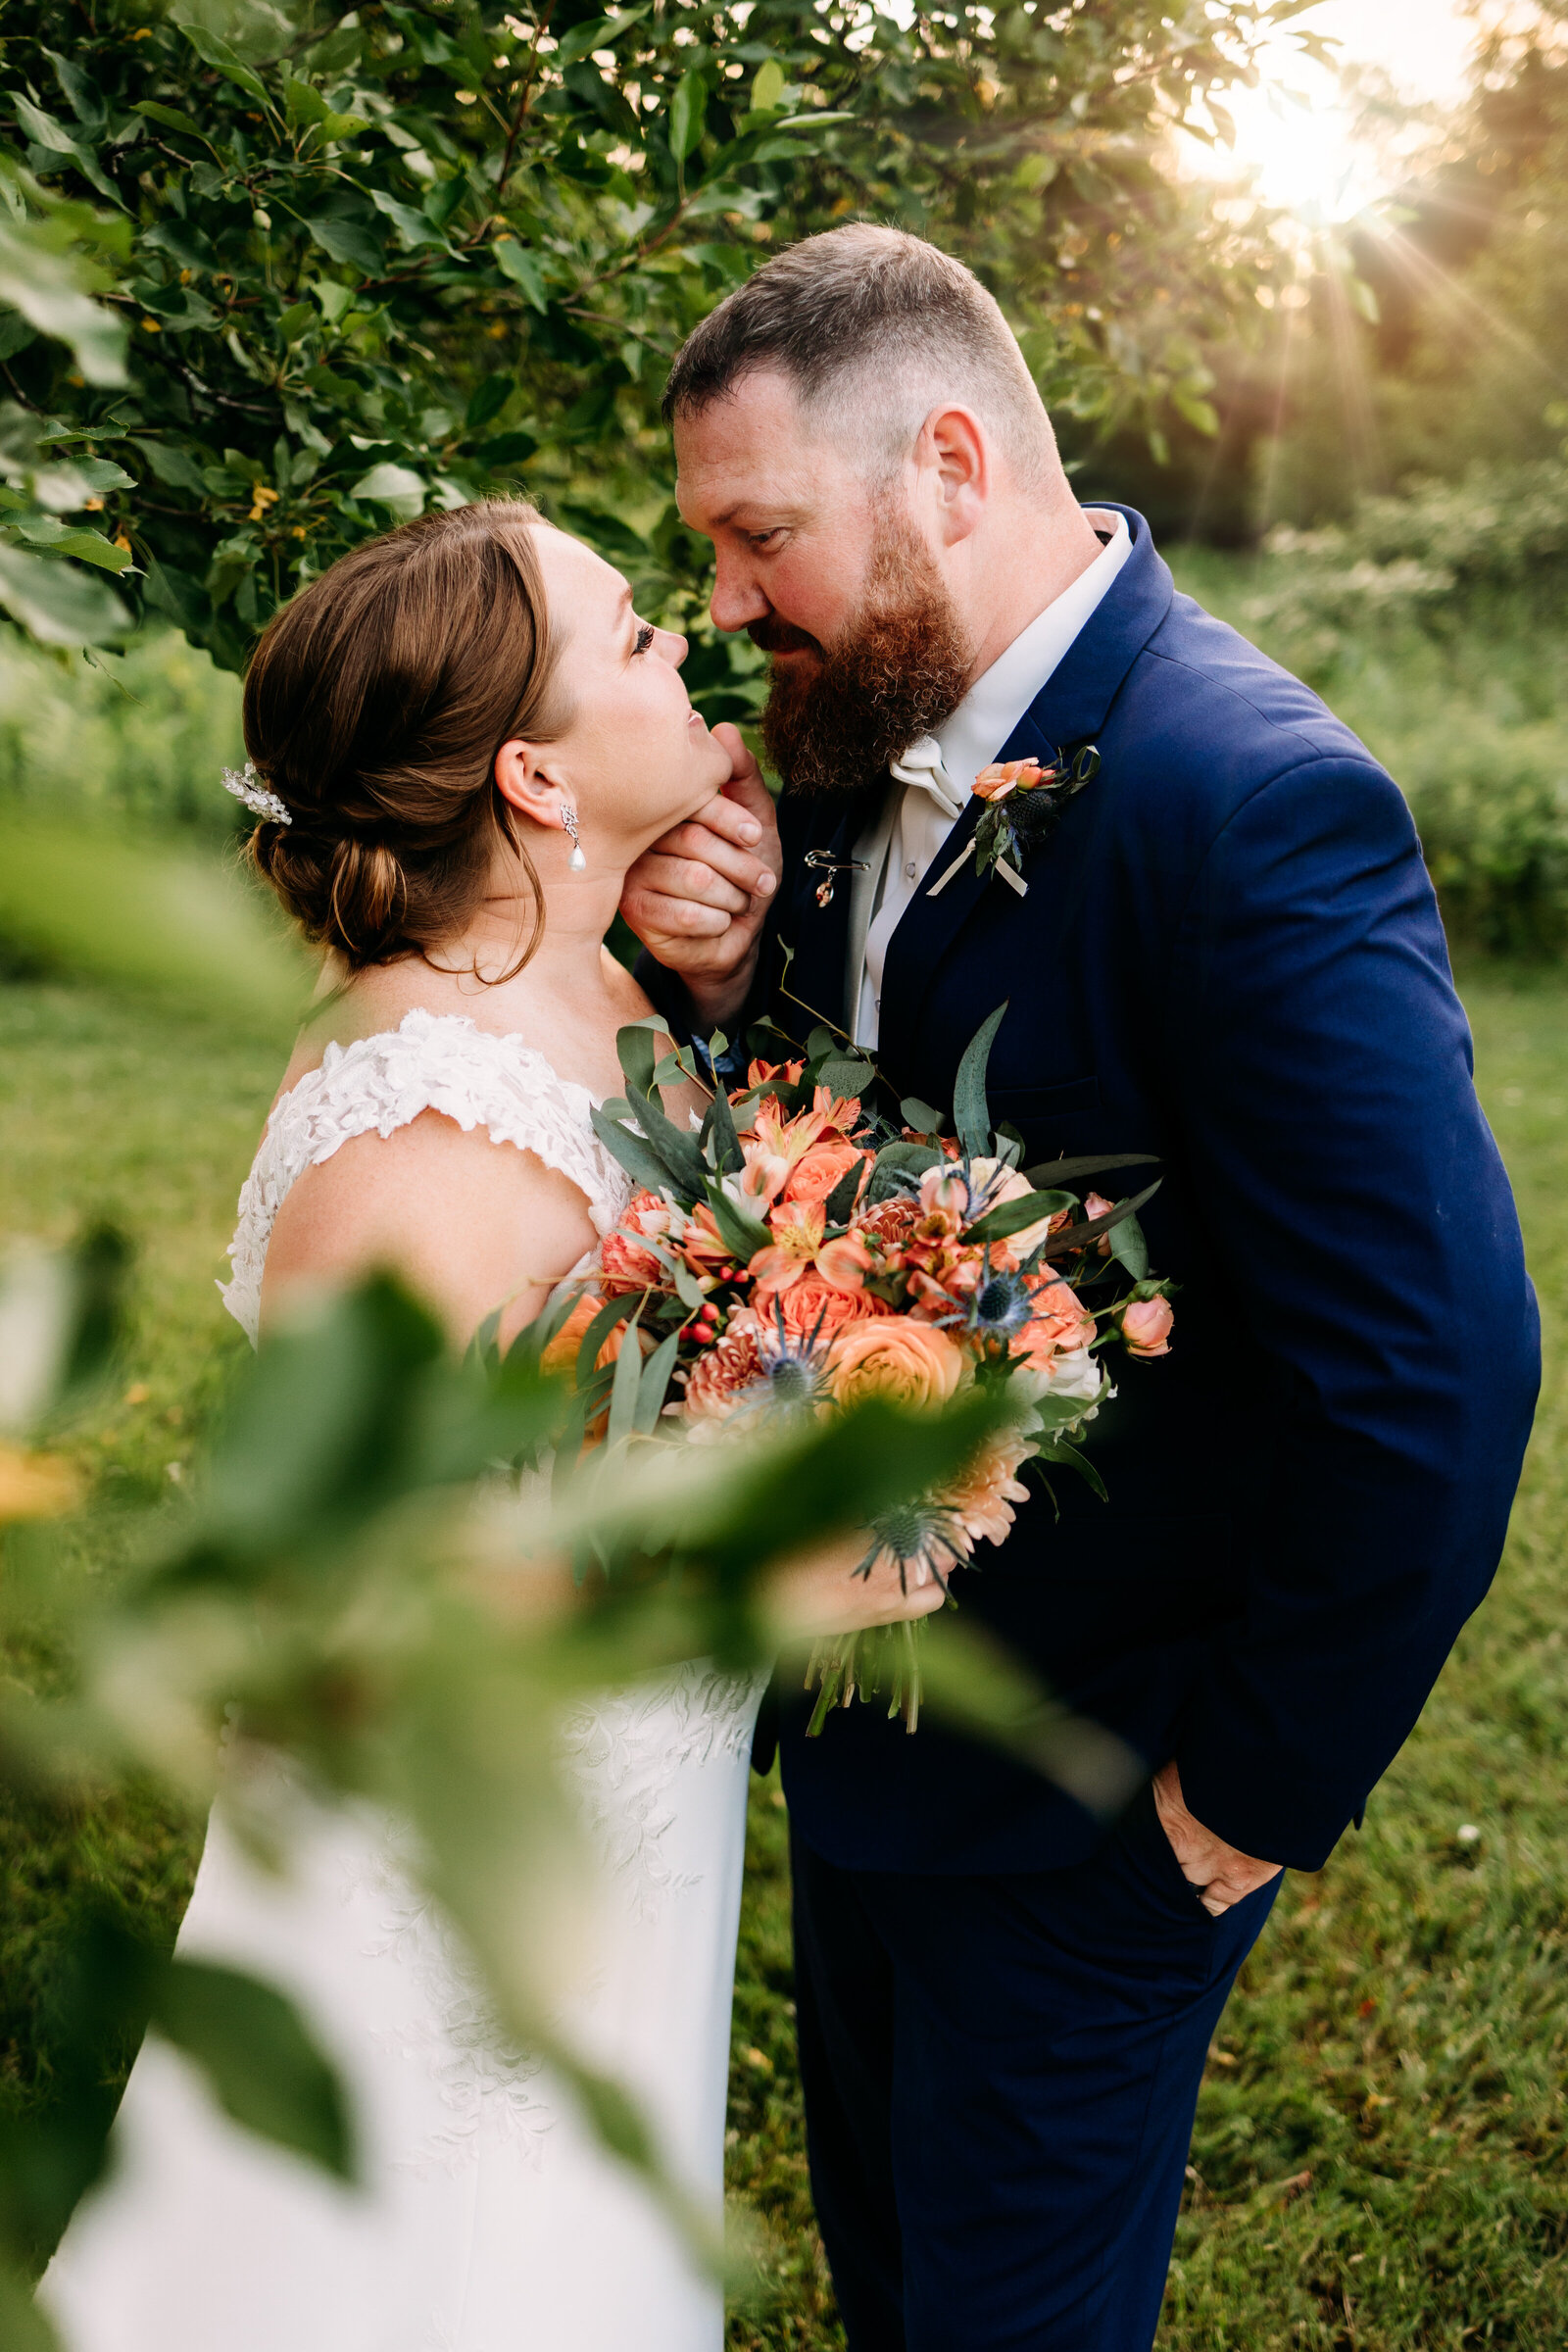 Groom tenderly pulls bride in for a kiss  ON THEIR WEDDING DAY